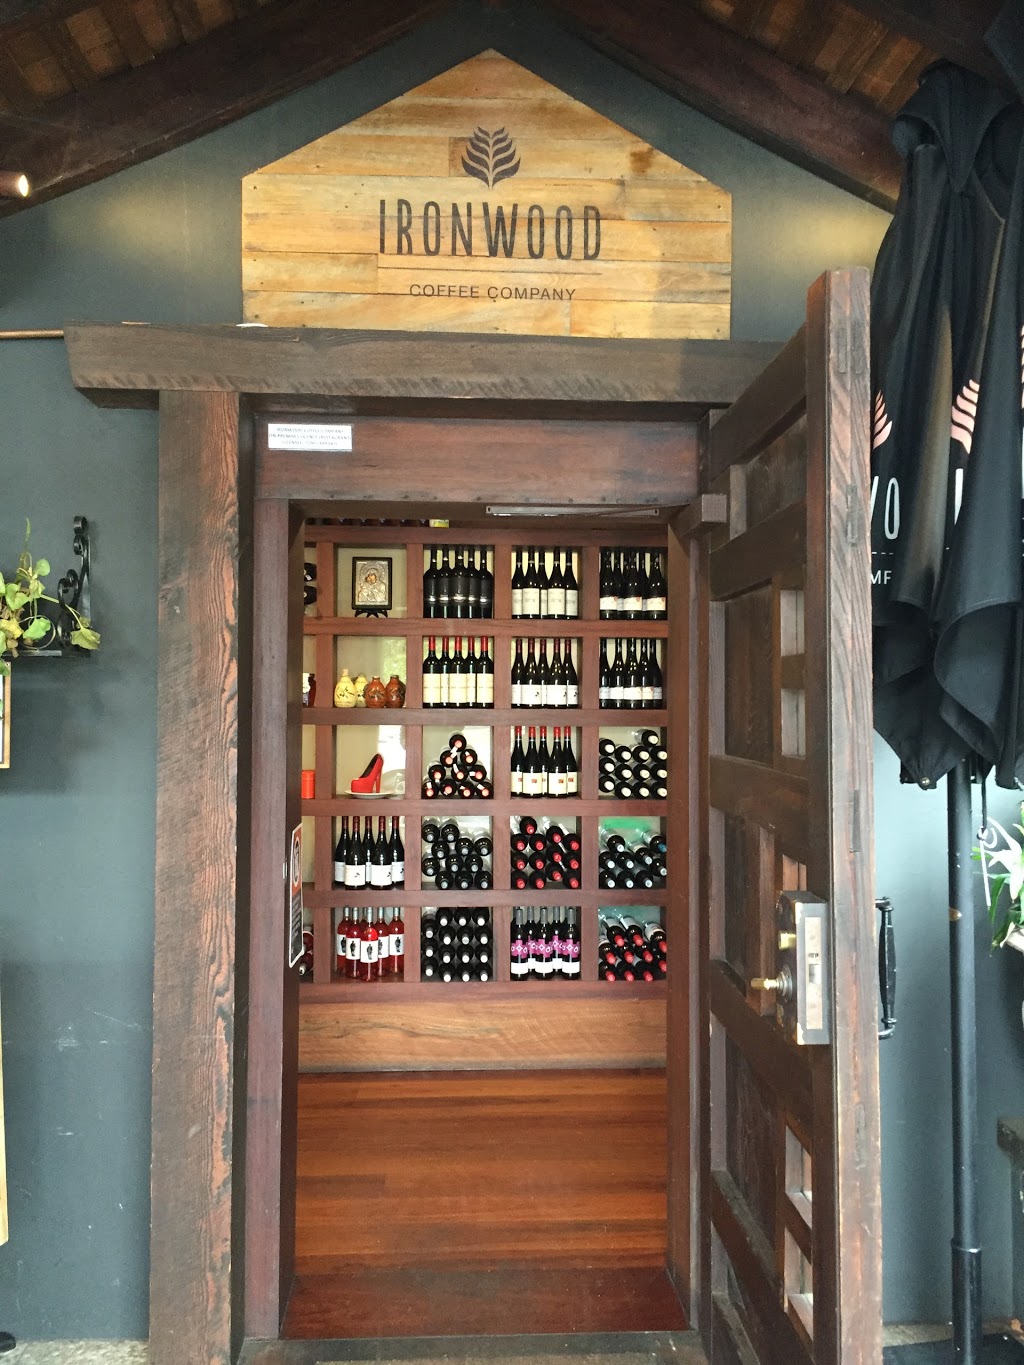 Ironwood Coffee Company | cafe | 102 Woolwich Rd, Woolwich NSW 2110, Australia | 0298797770 OR +61 2 9879 7770